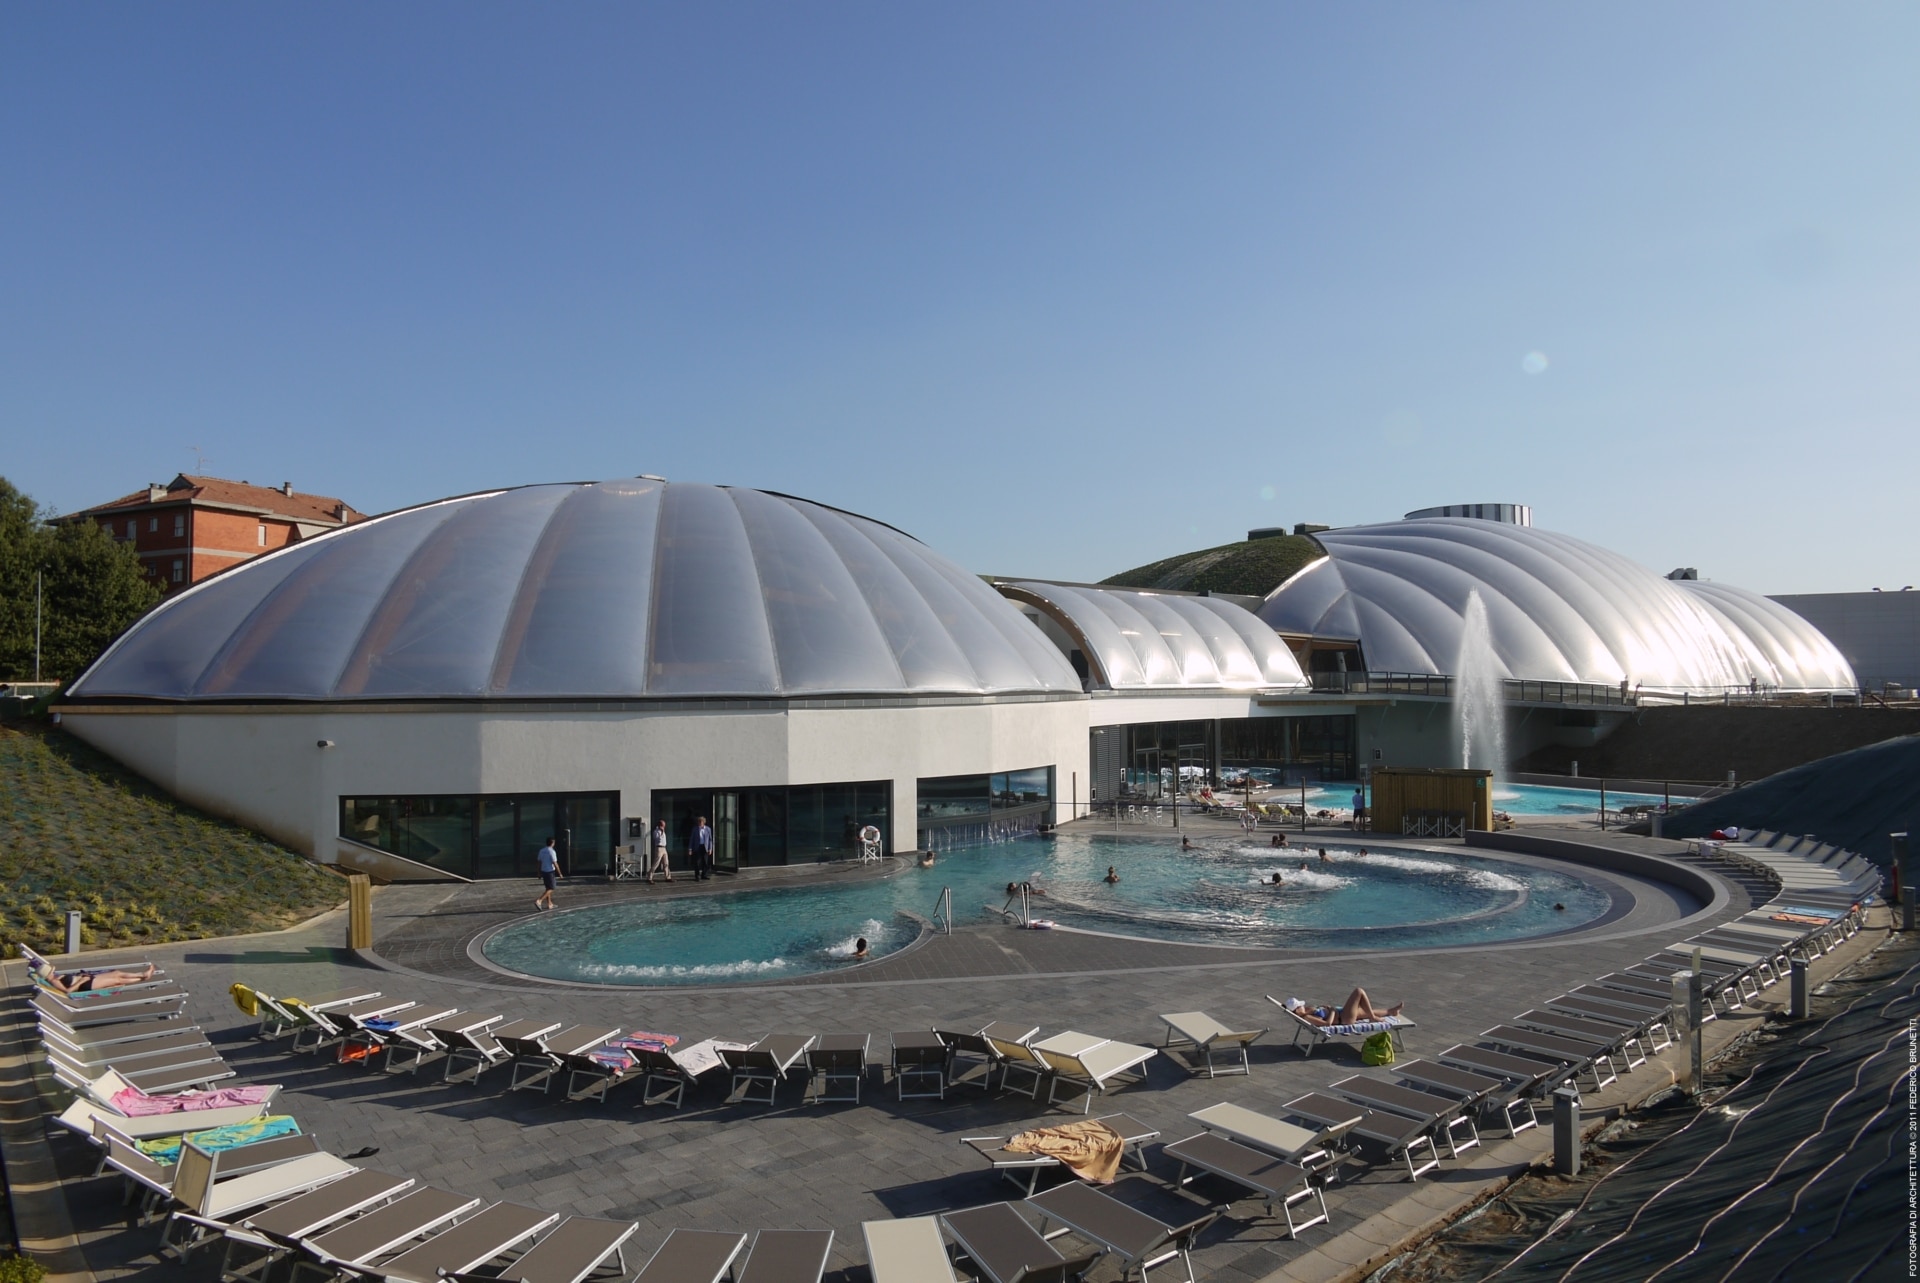 Our Texlon® ETFE system creates a year-round swimming and entertainment experience